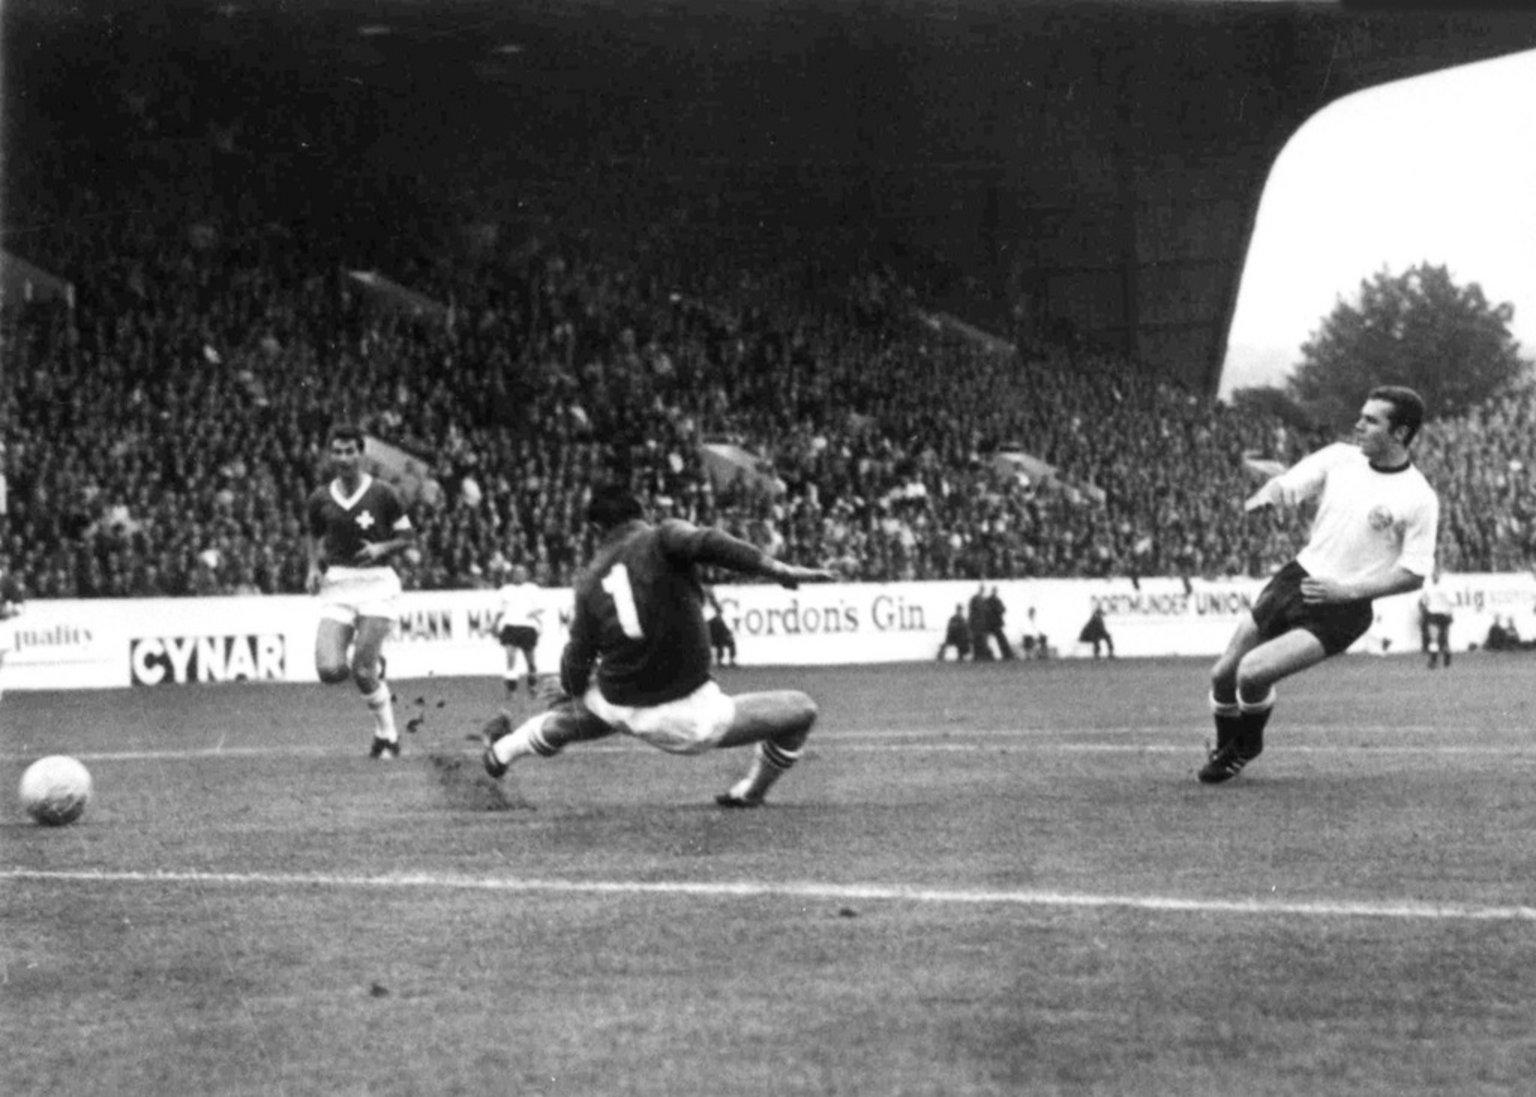 Happy 70th birthday Franz Beckenbauer - 50 years ago his majestic skills graced the hollowed turf at 